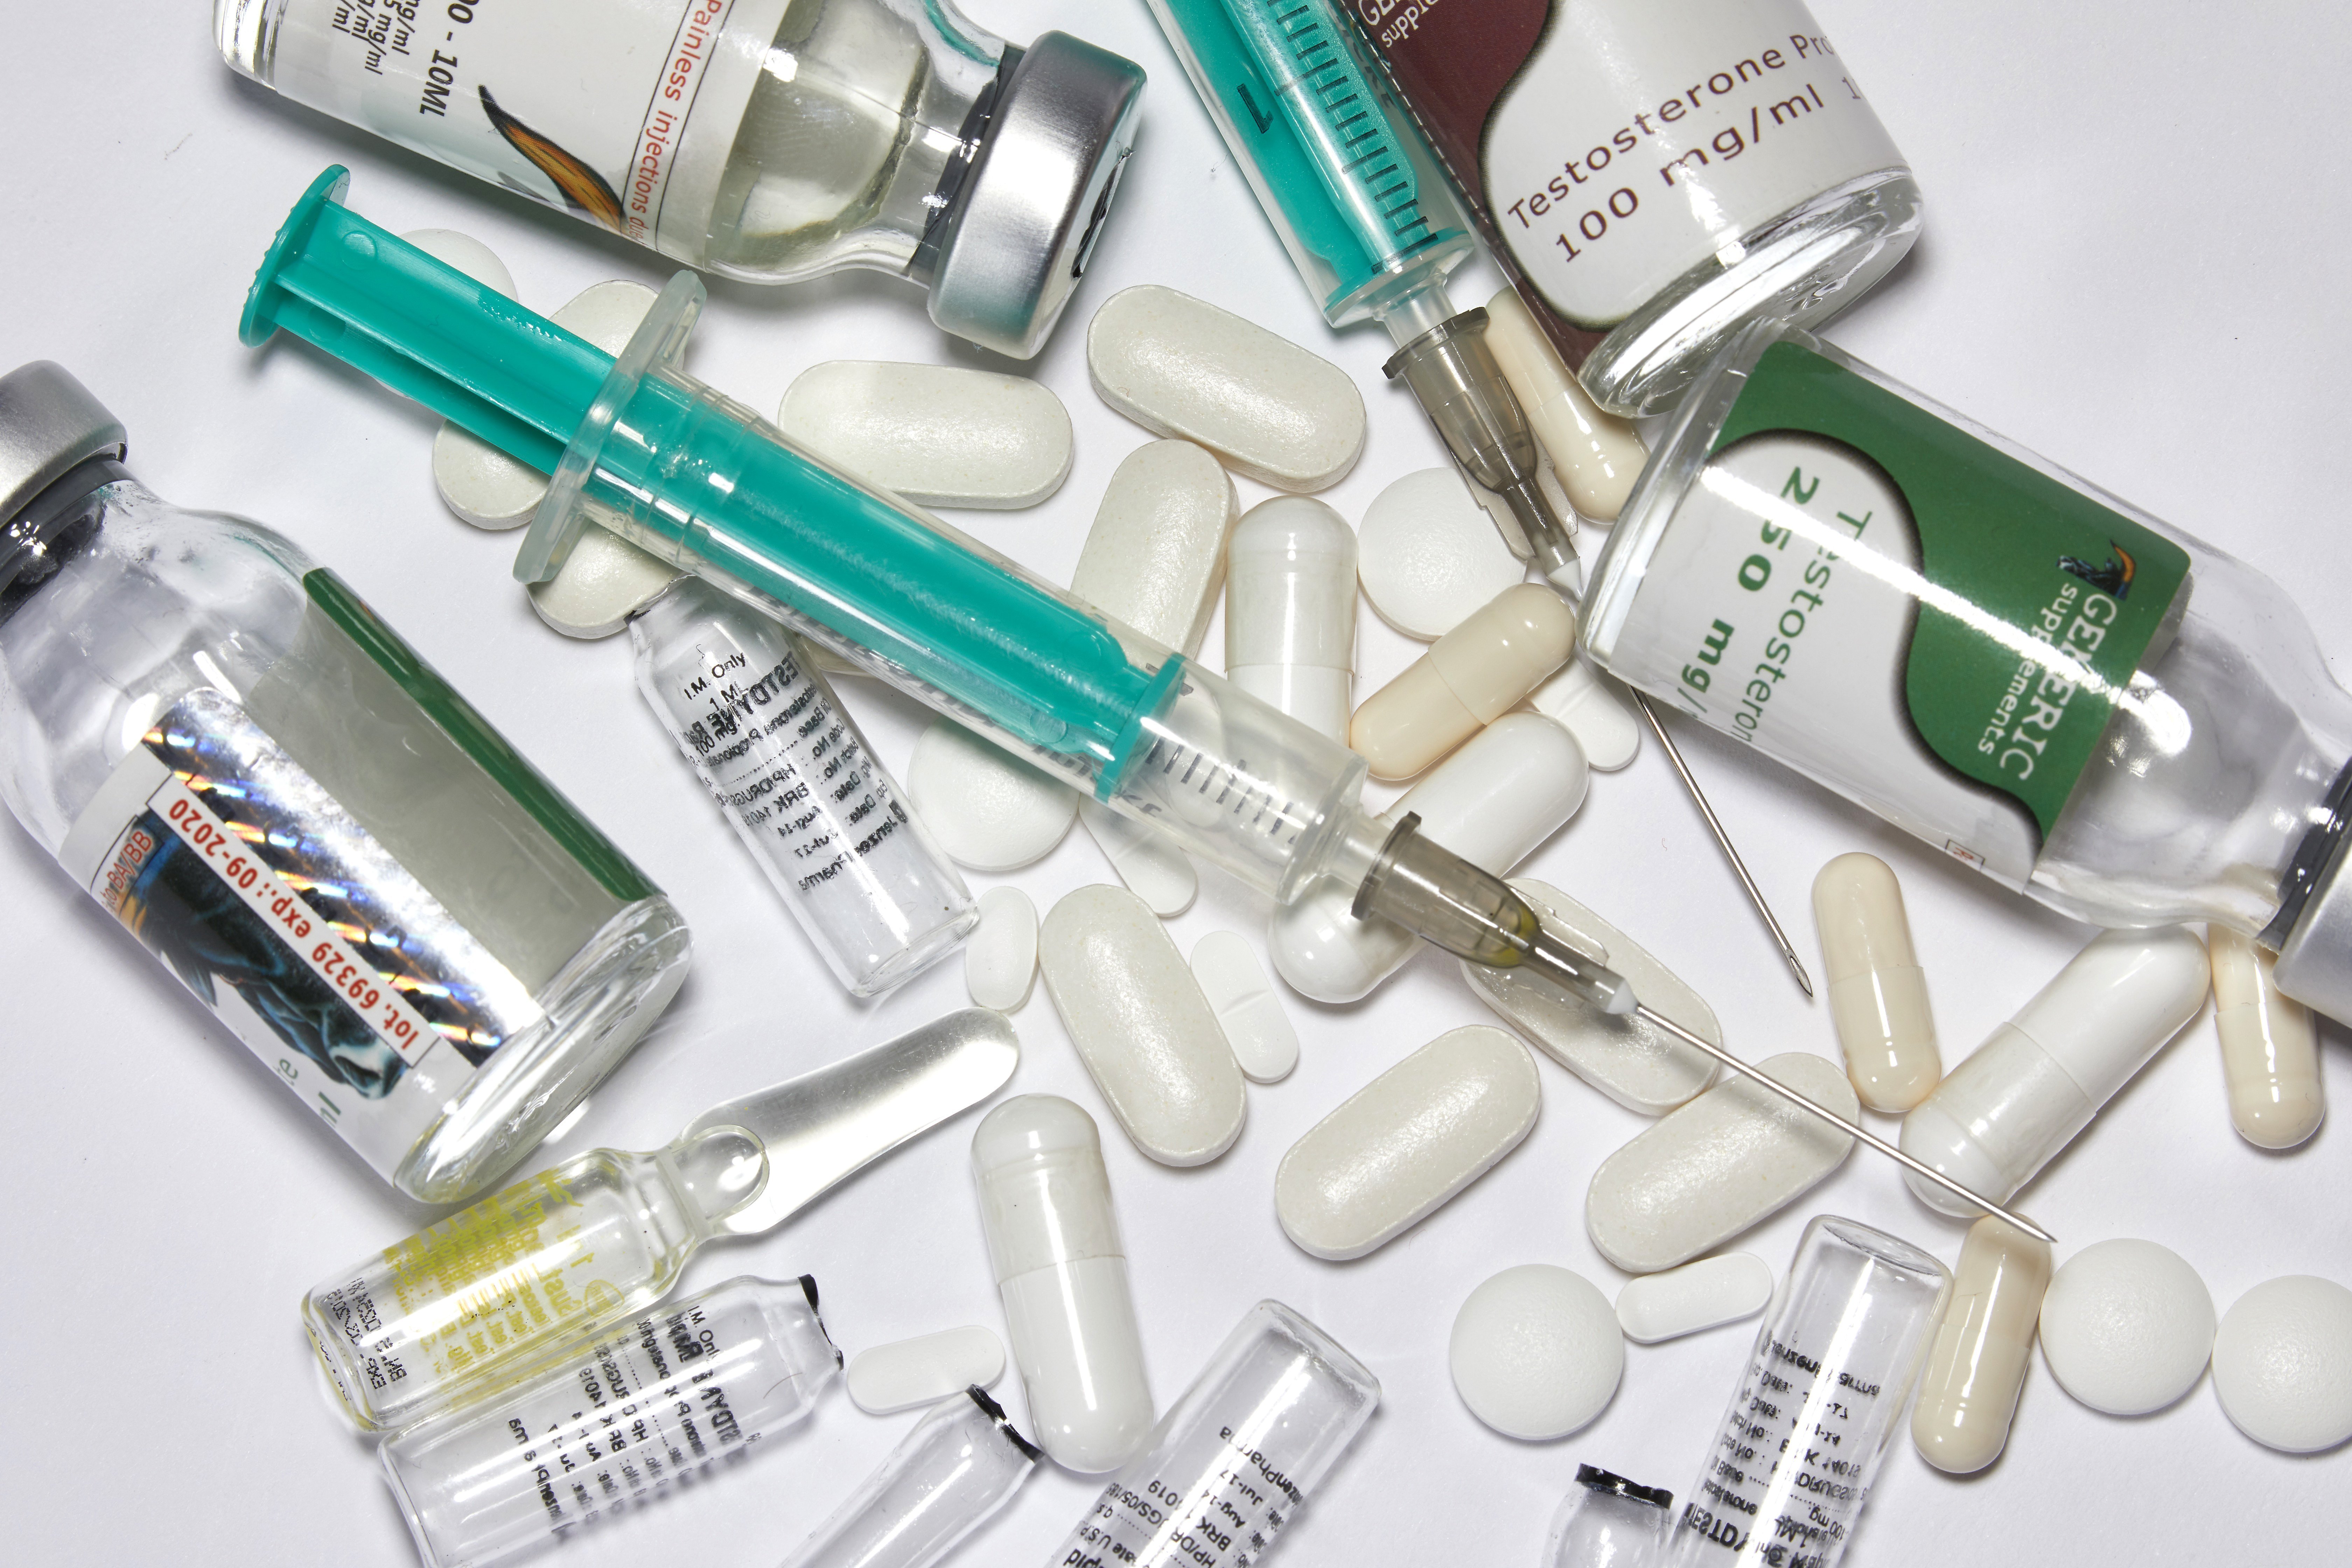 Medications at a hospital | Getty Images